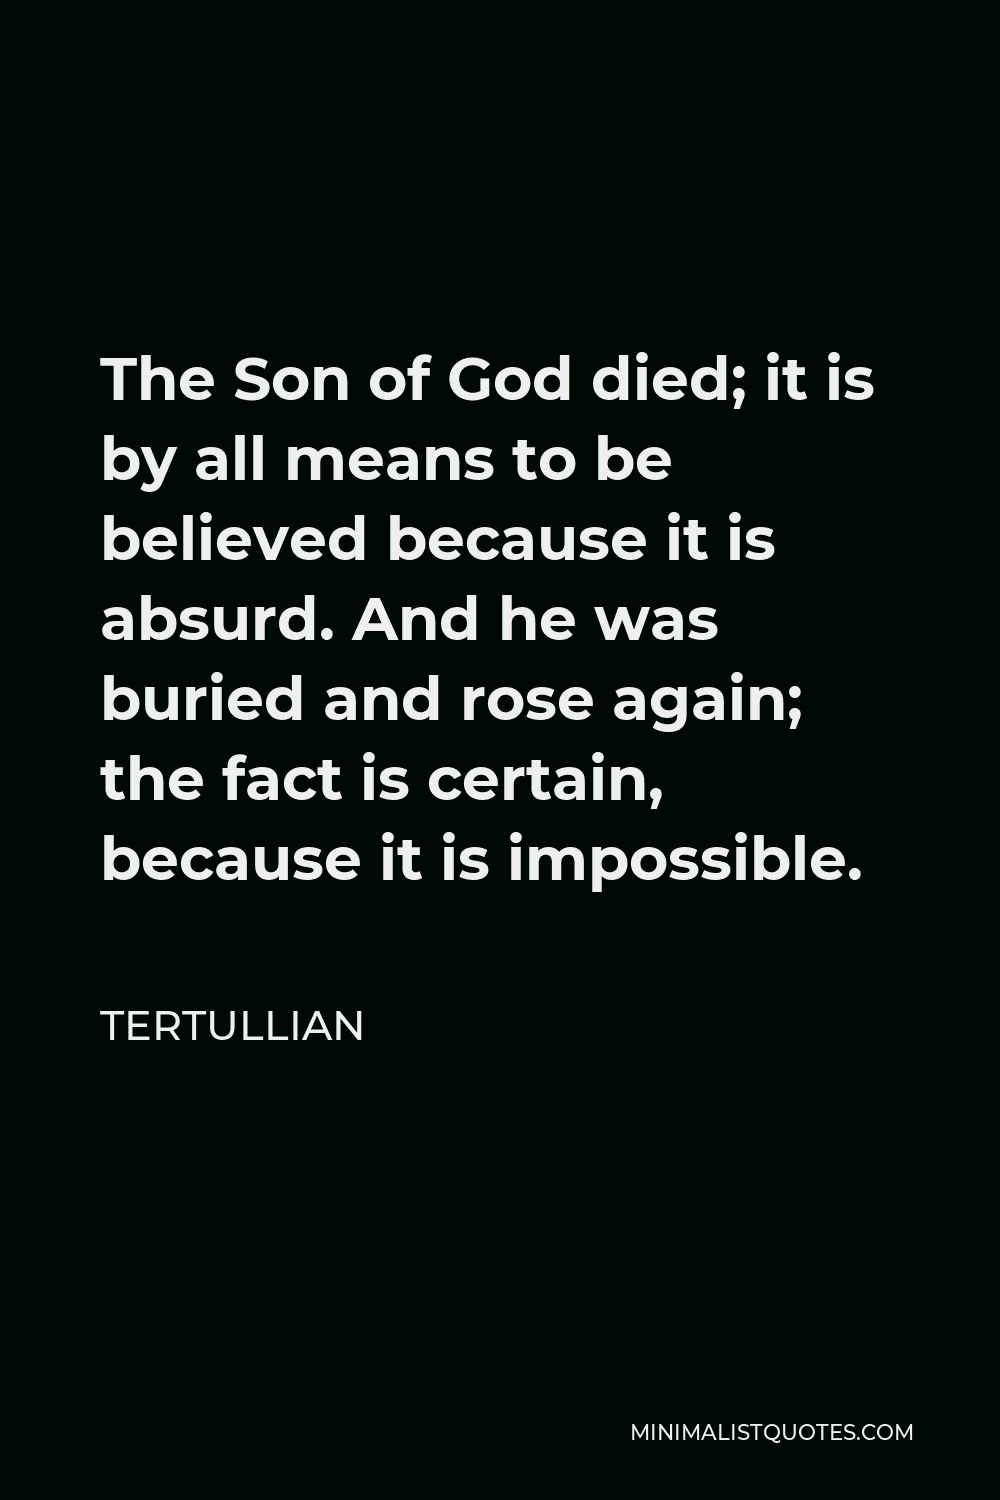 Tertullian Quote - The Son of God died; it is by all means to be believed because it is absurd. And he was buried and rose again; the fact is certain, because it is impossible.